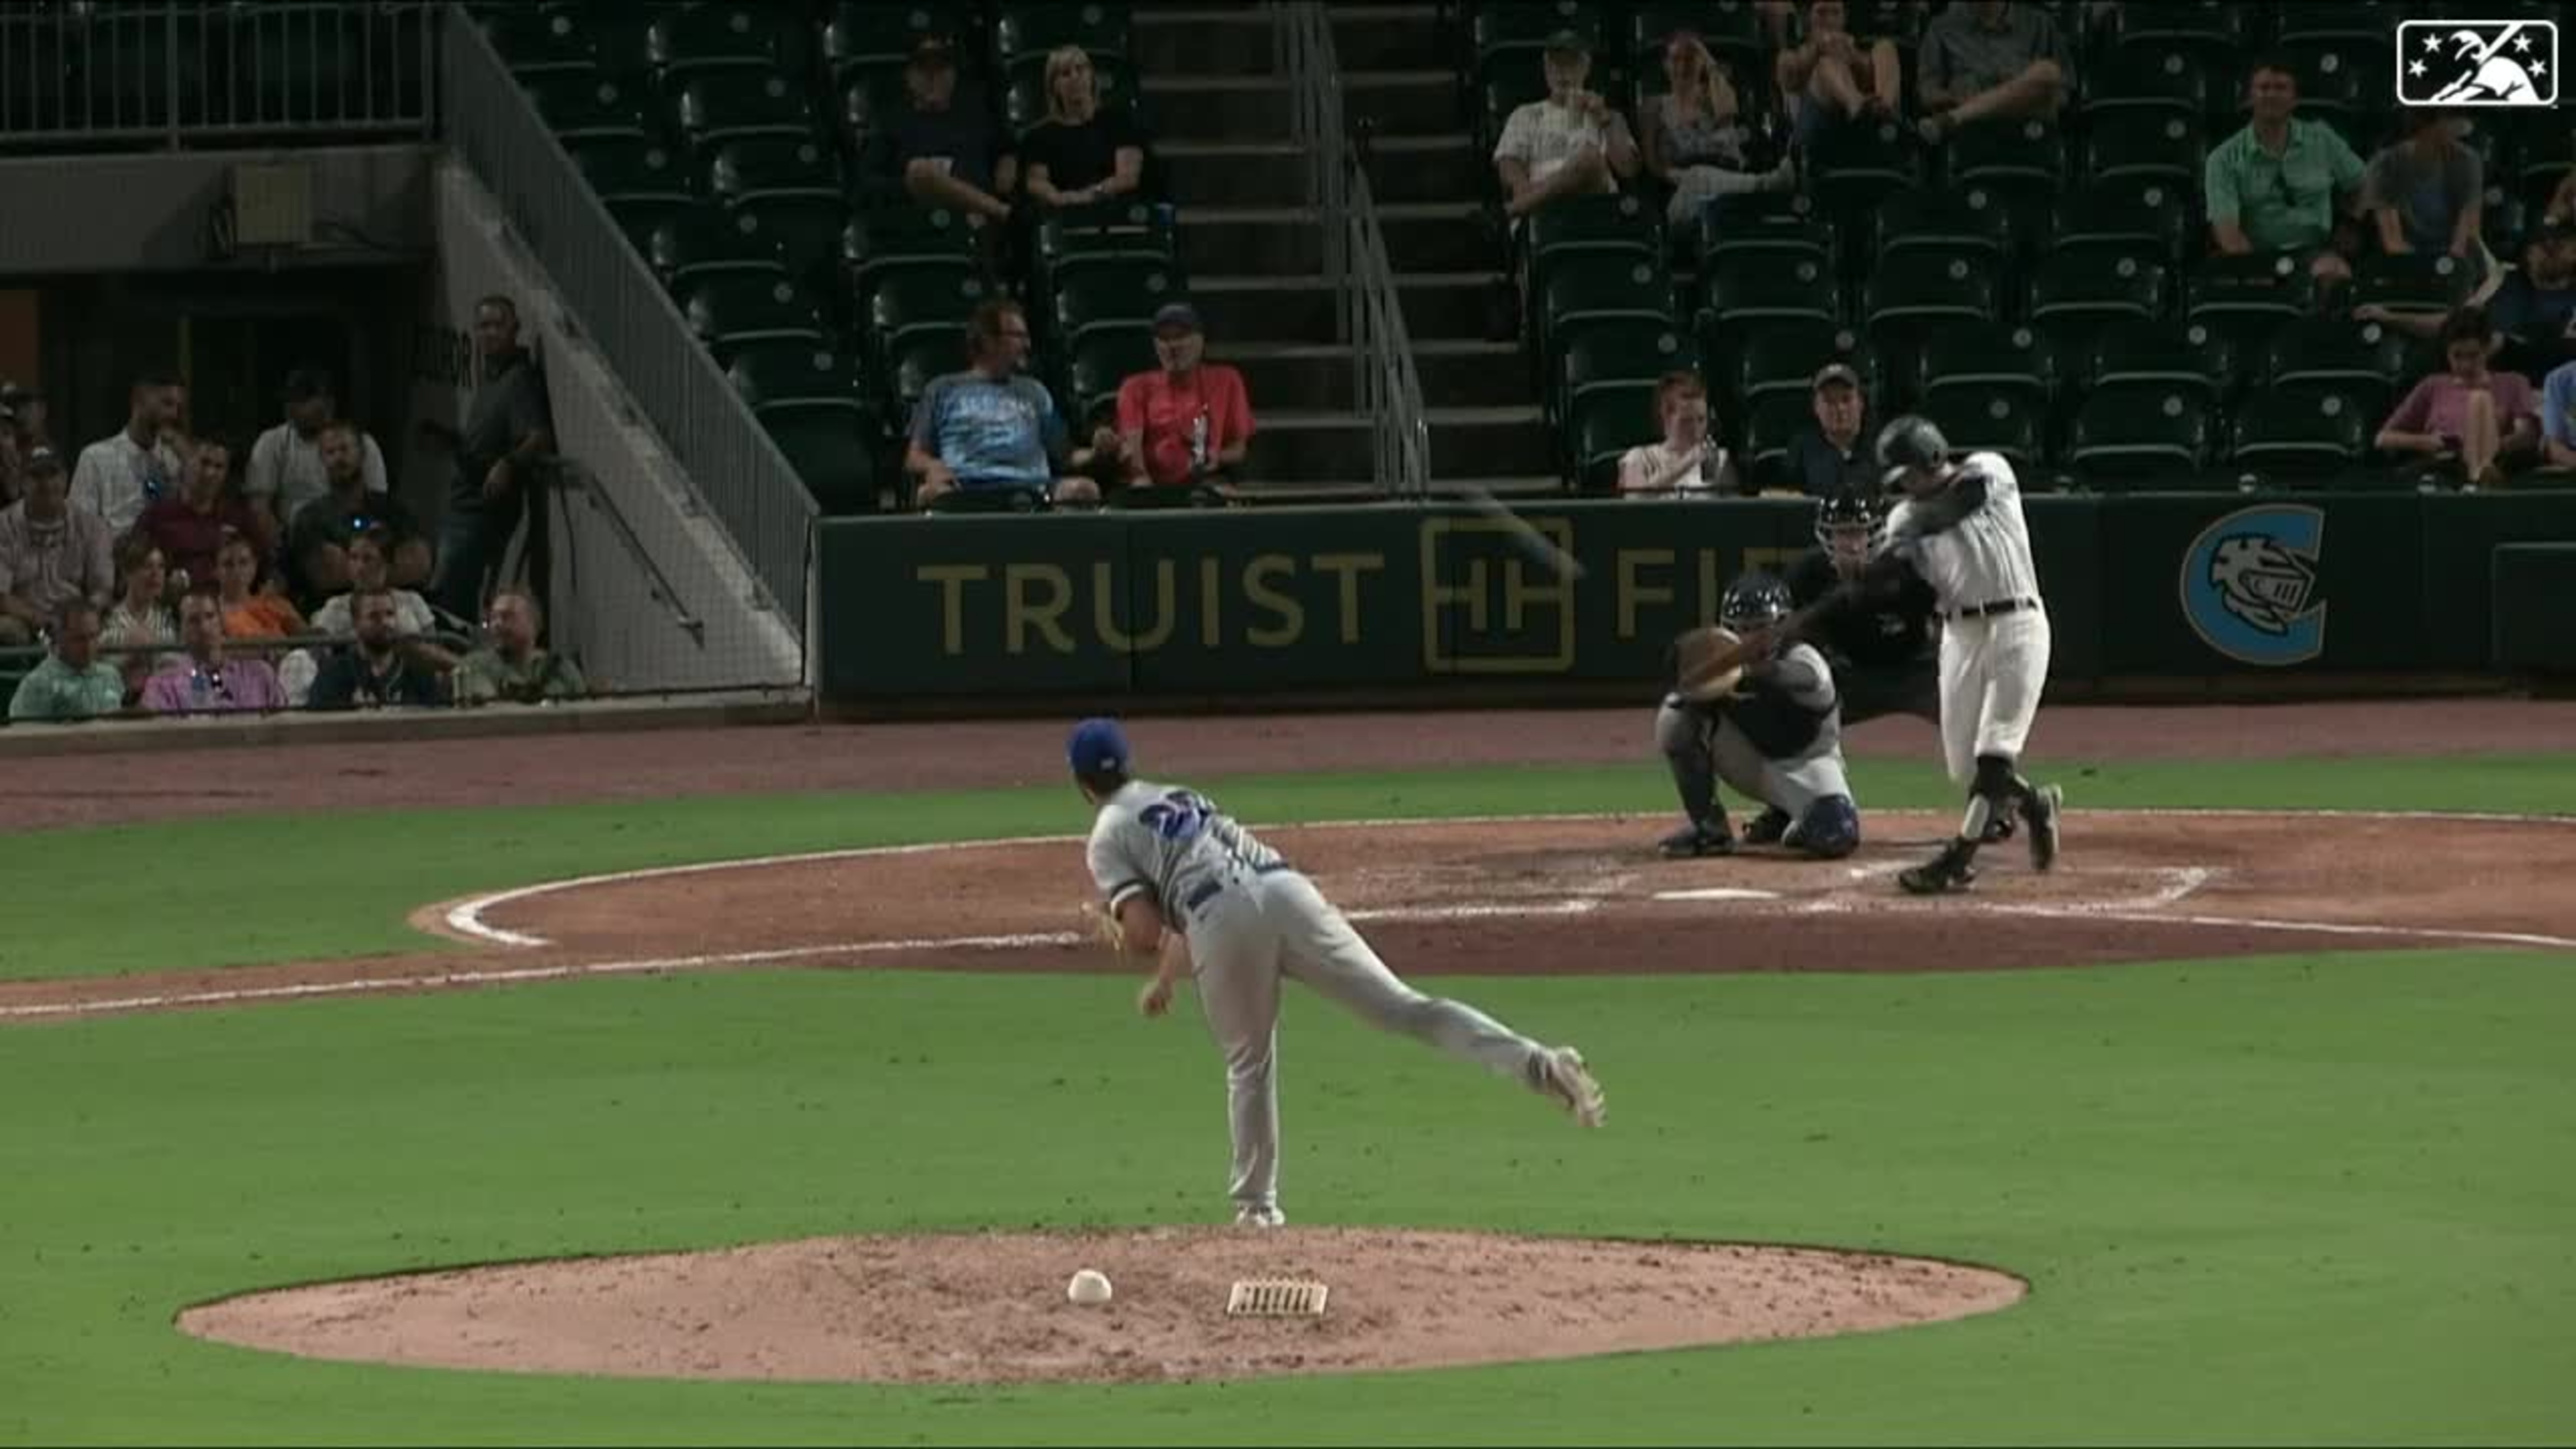 Clint Frazier of the Chicago White Sox at bat against the Texas